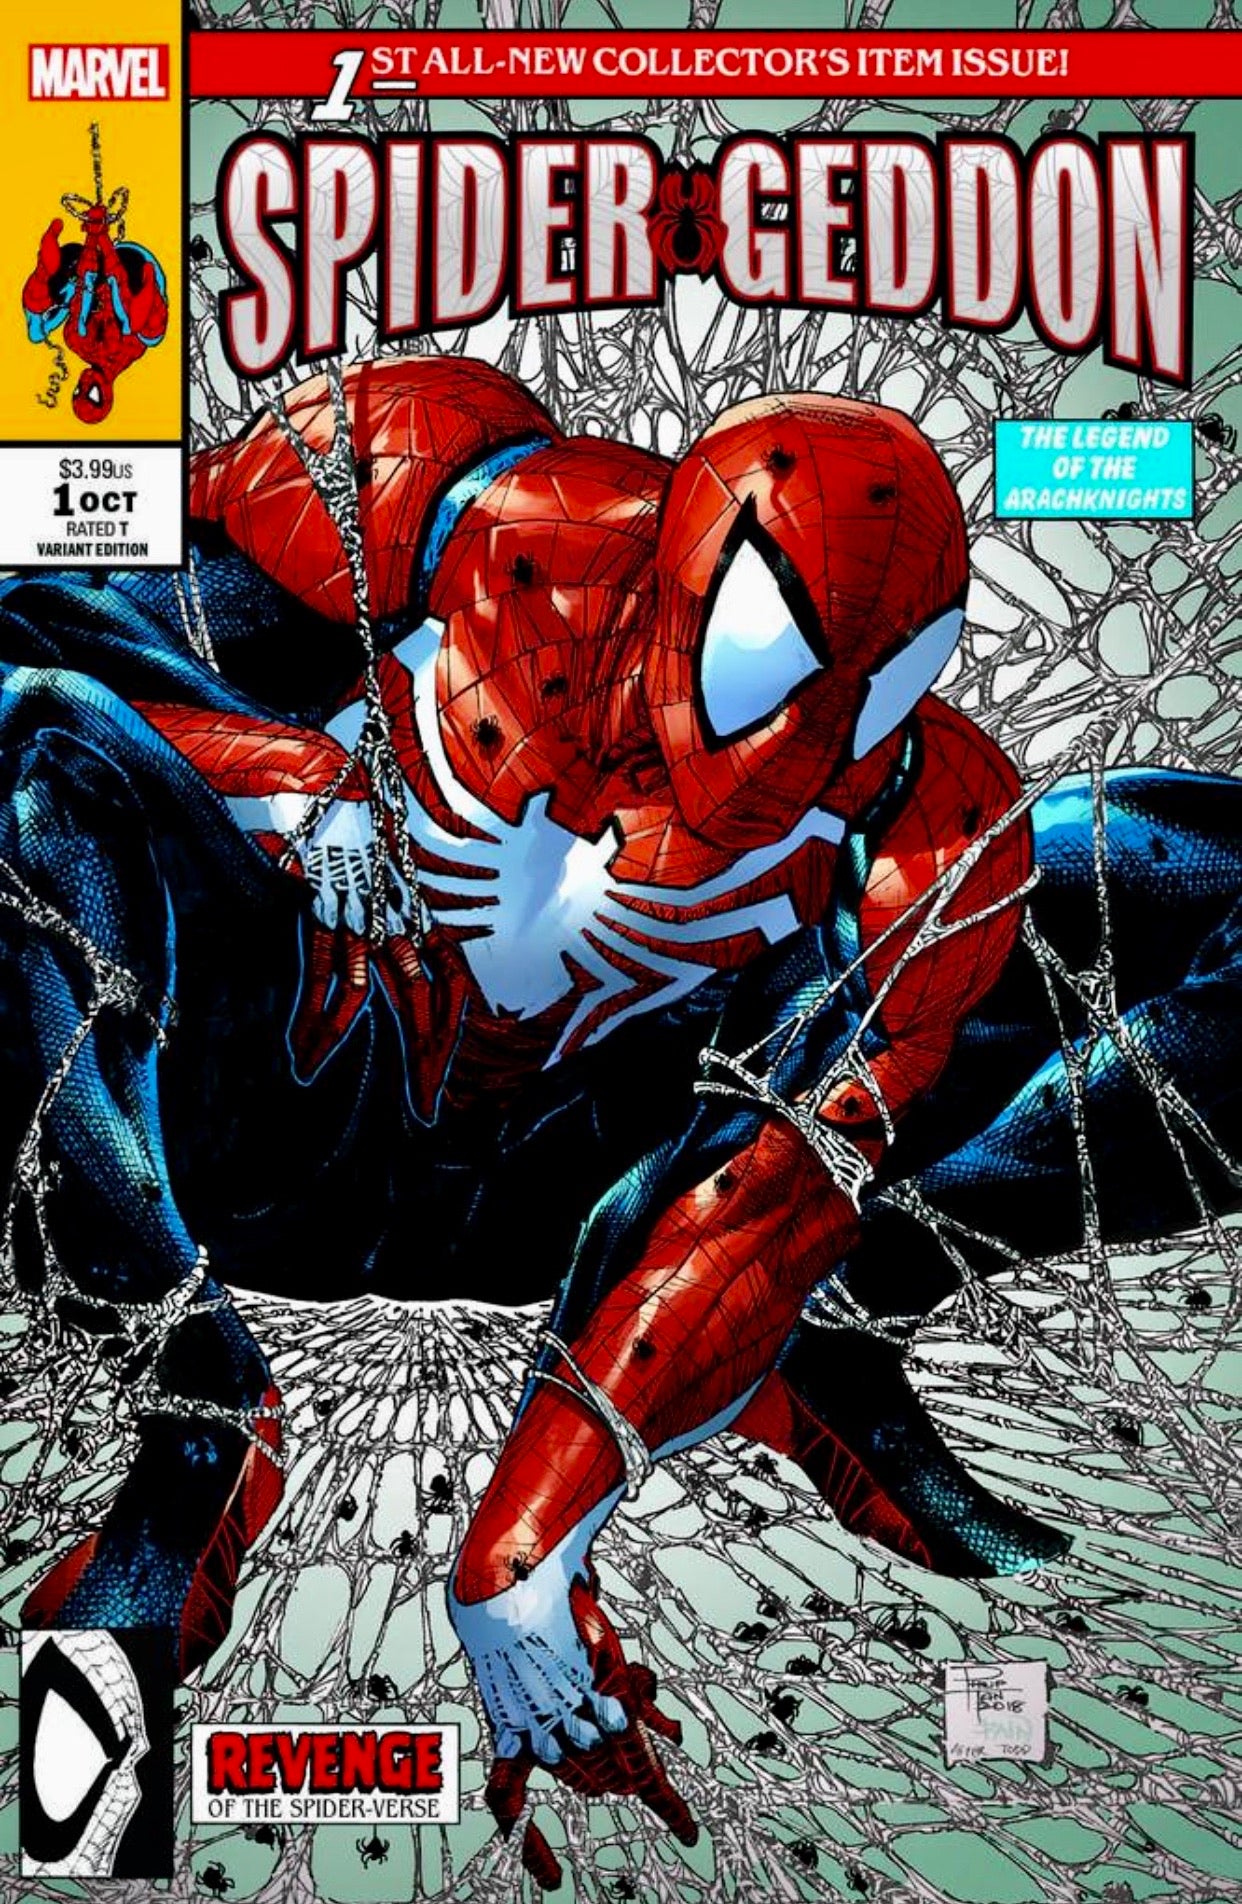 Spider-Geddon #1 Philip Tan Exclusive Variant - Limited to 1,500 w/COA!